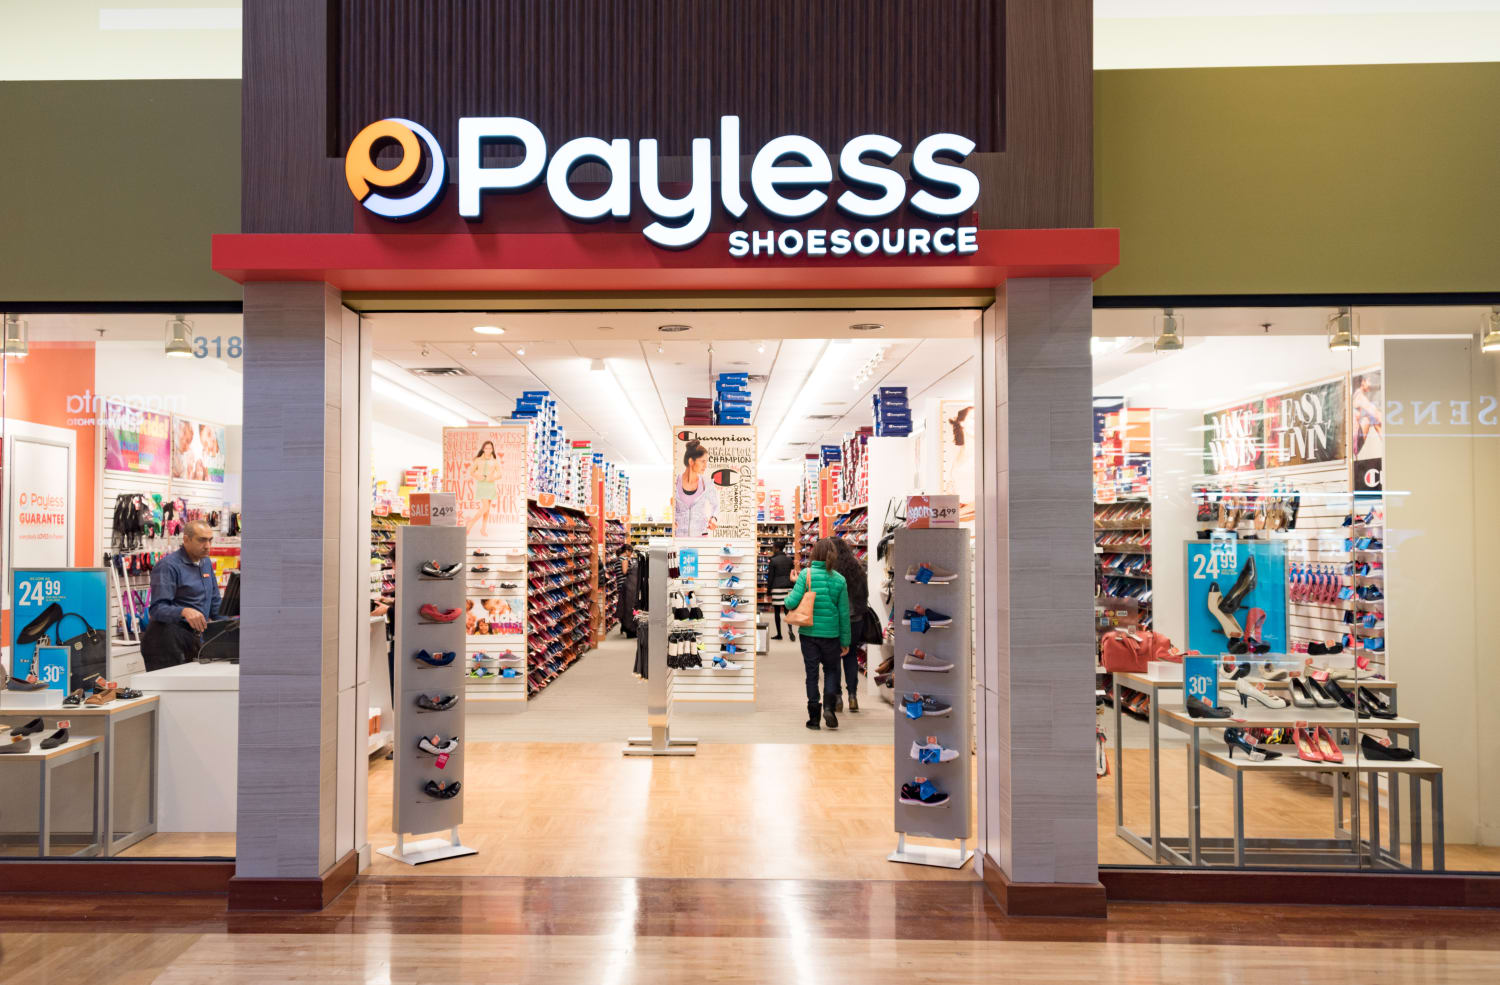 Payless relaunches with website, plans 